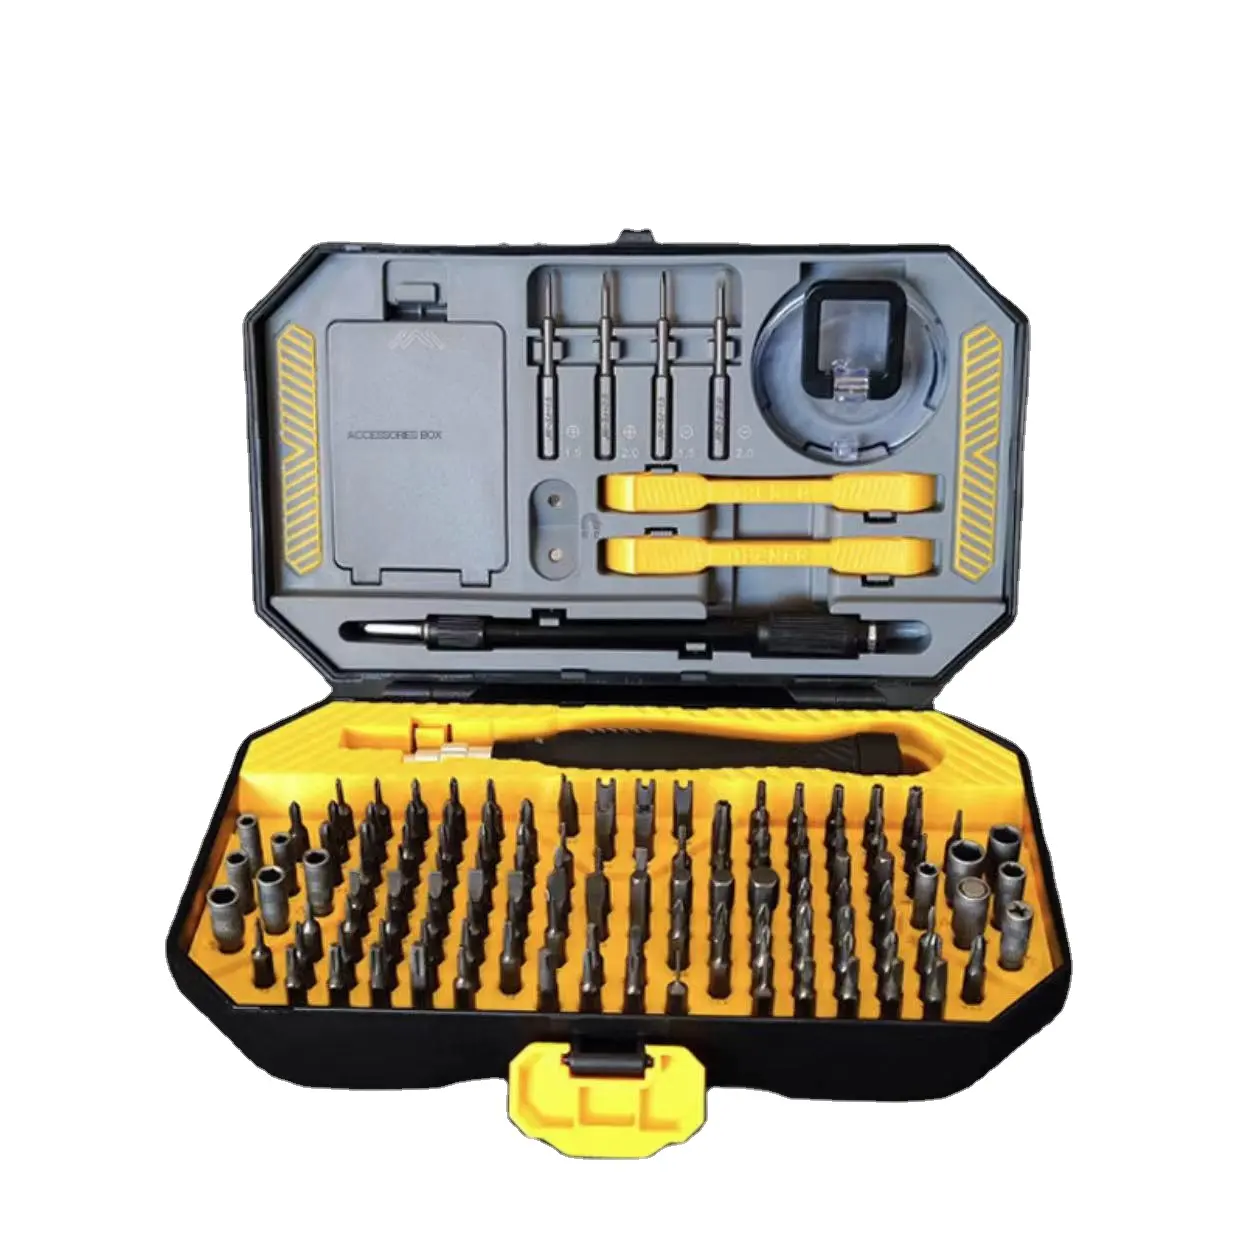 145 in 1 precision screwdriver set, professional electronic repair tool kit, suitable for repairing computers and laptops.